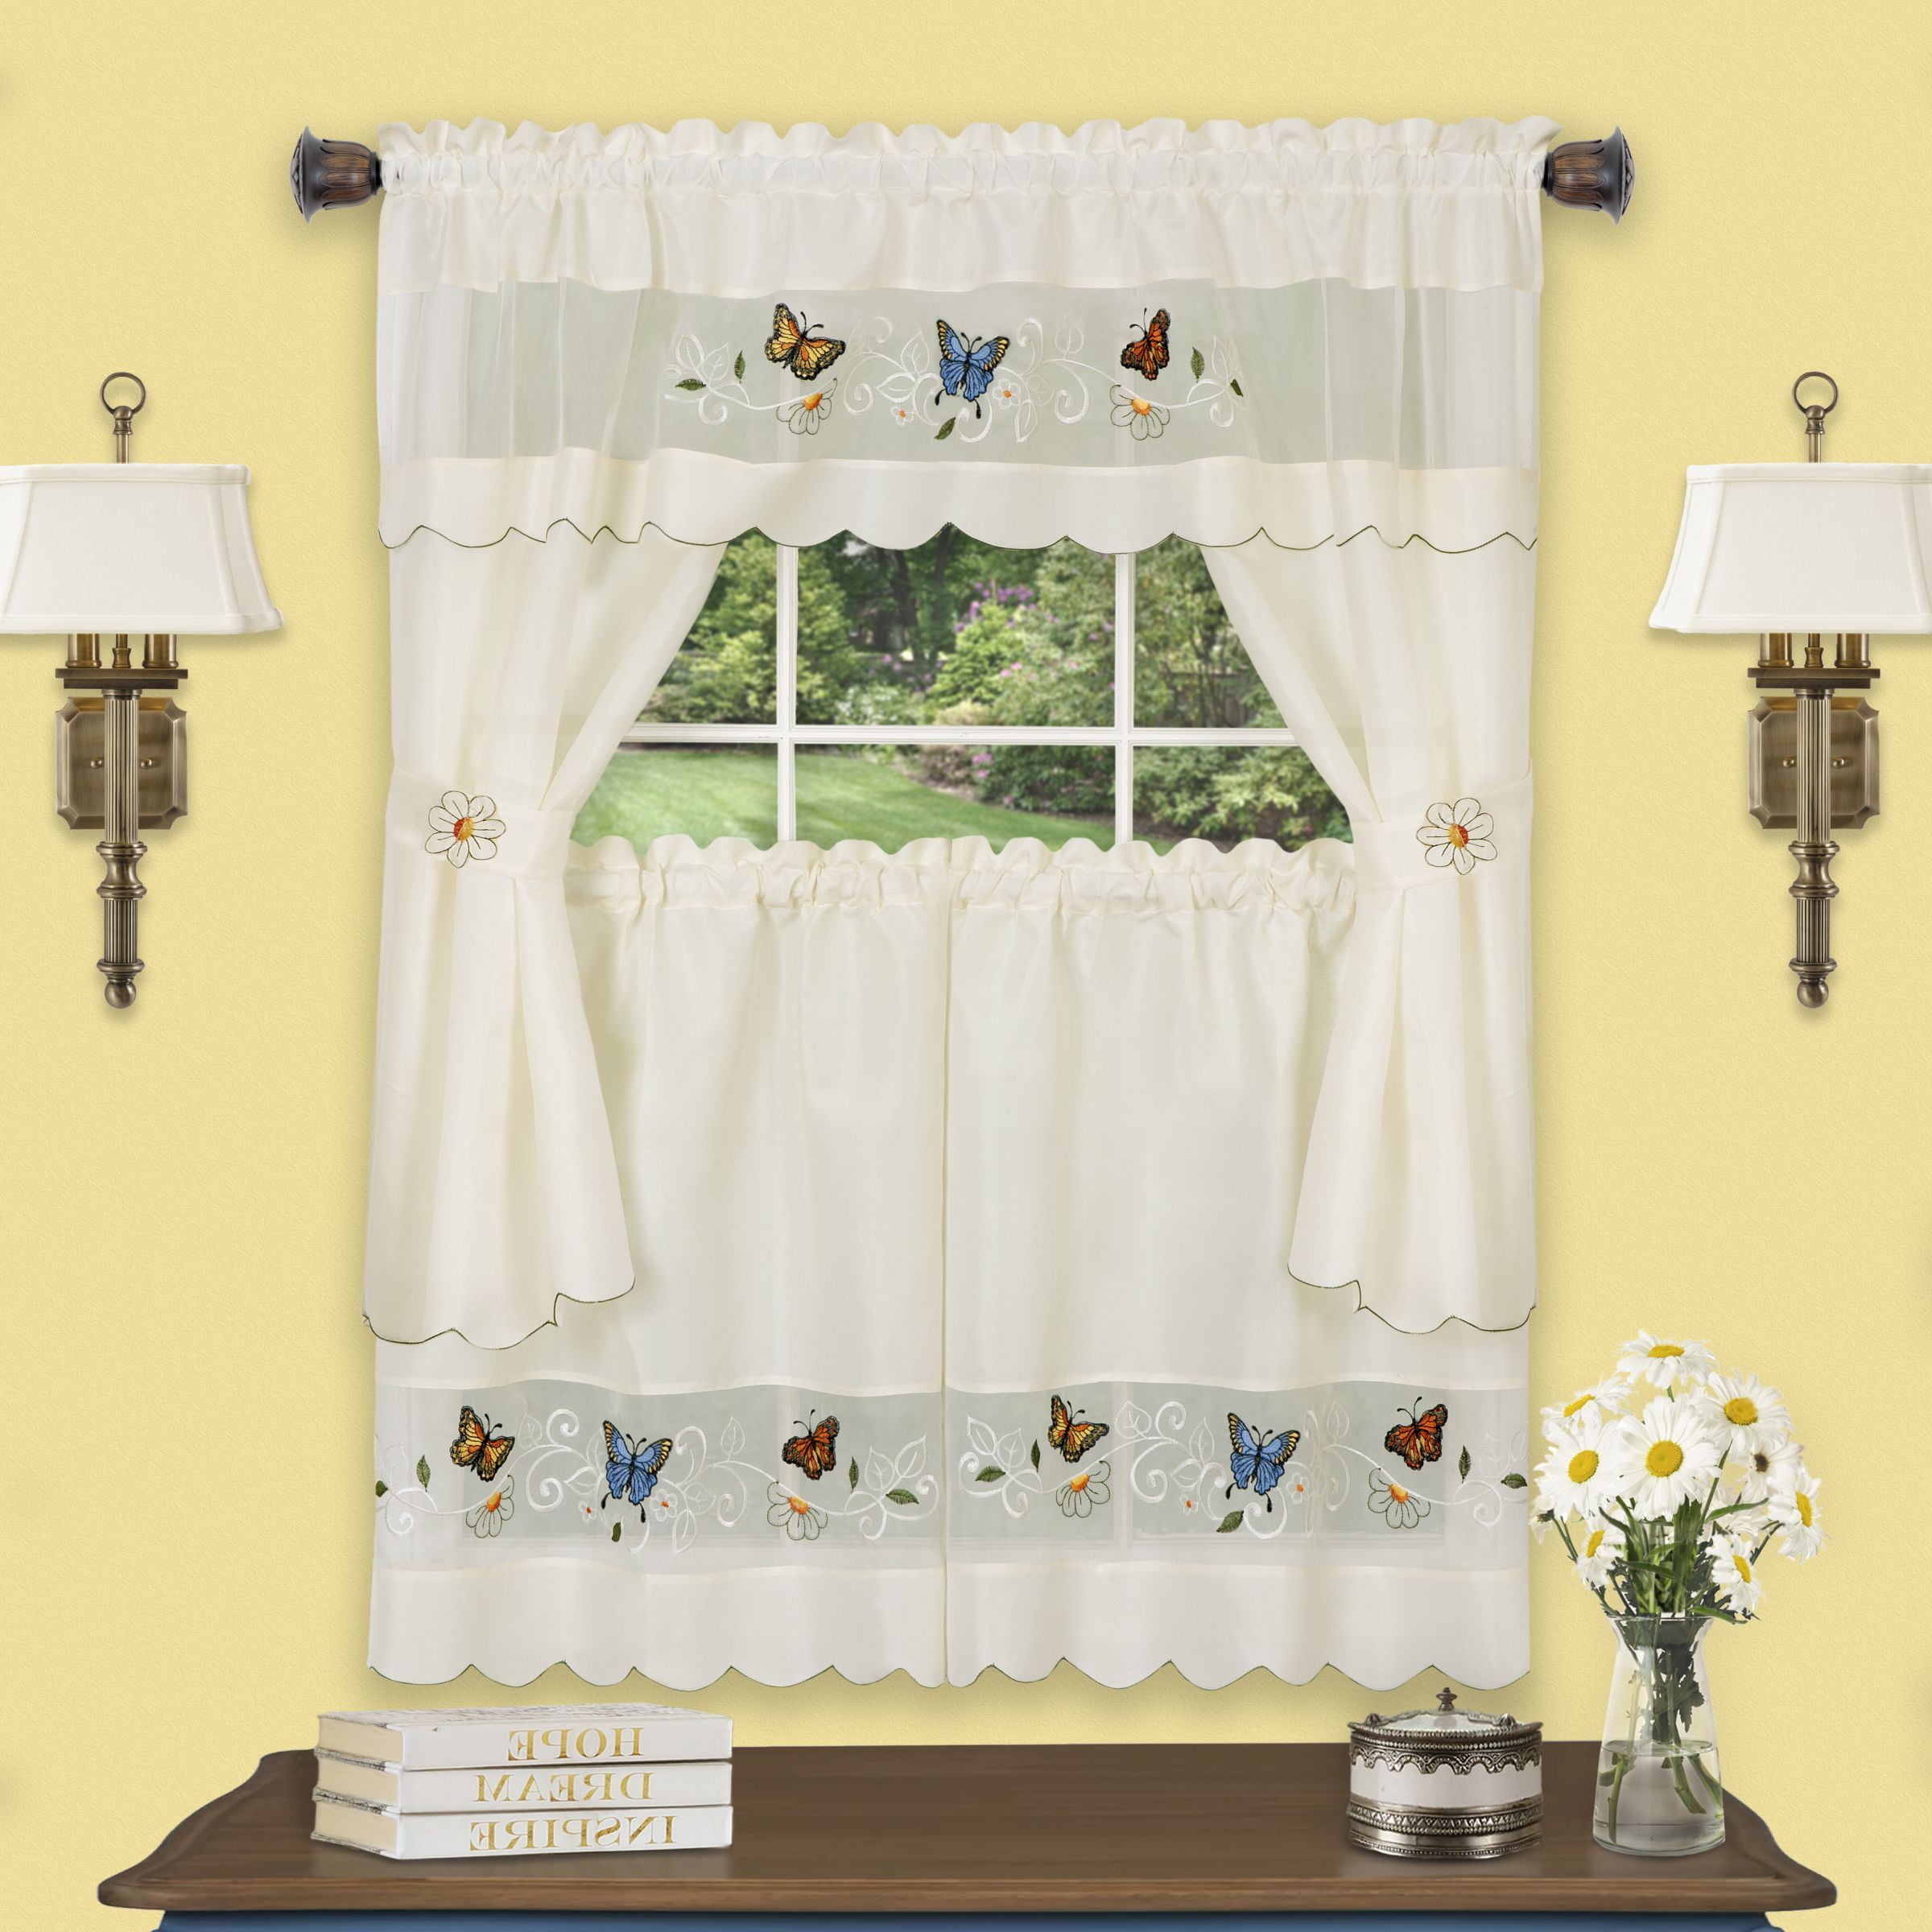 58x36" Embellished Cottage Curtains Set COLORFUL BUTTERFLIES,DAISY MEADOW,Achim